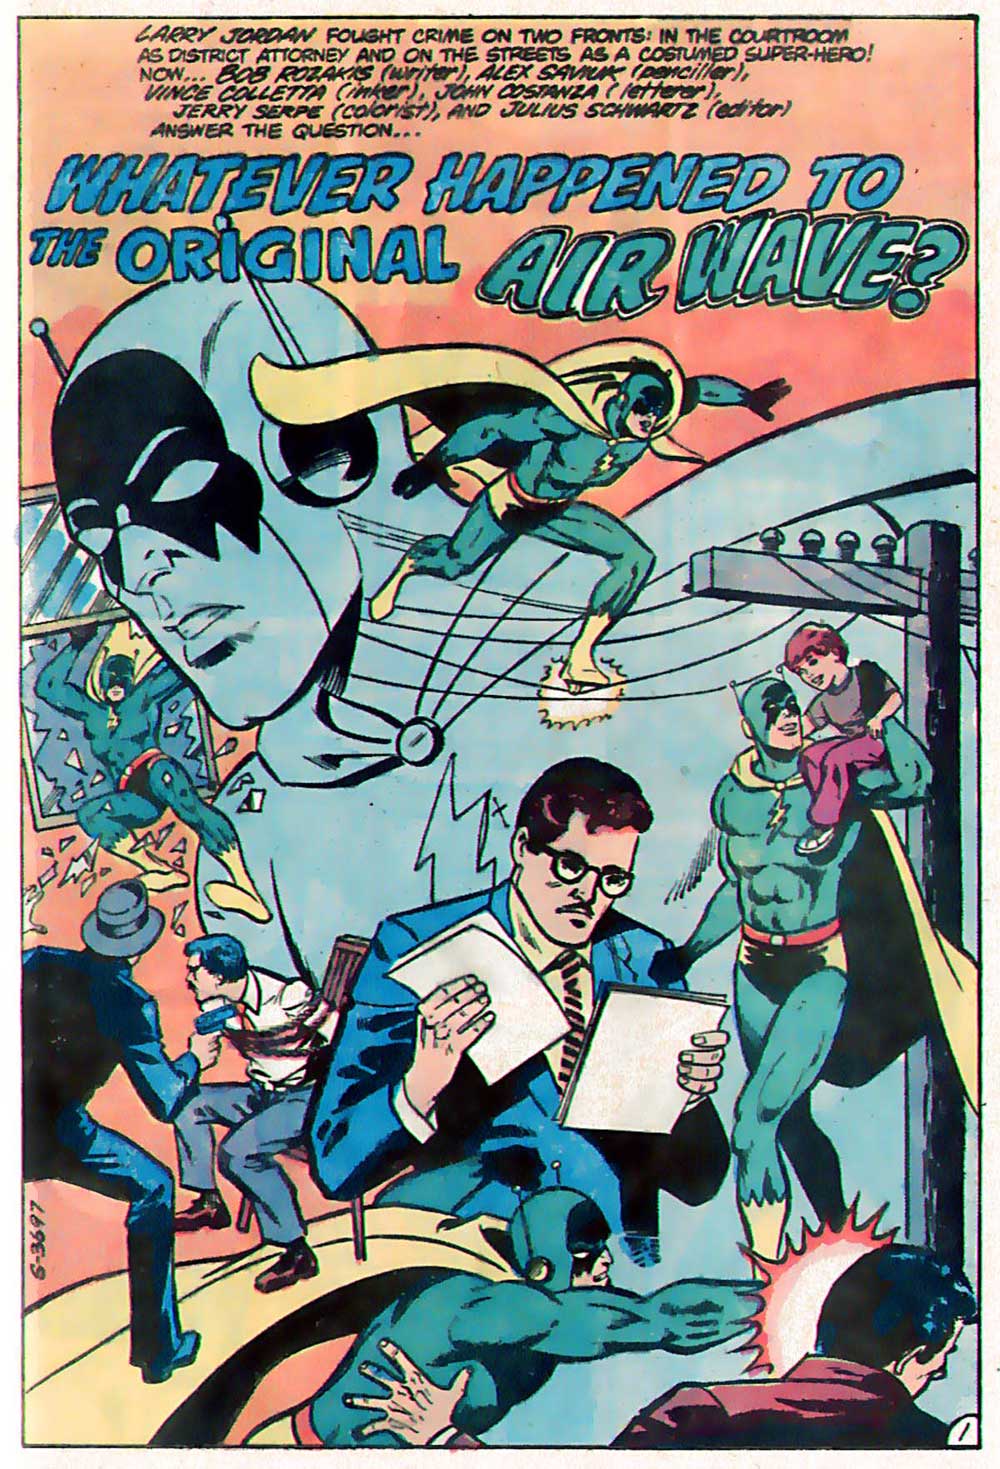 Whatever Happened To... The Original Airwave! From DC Comics Presents #40, by Bob Rozakis, Alex Saviuk, and Vince Colletta.